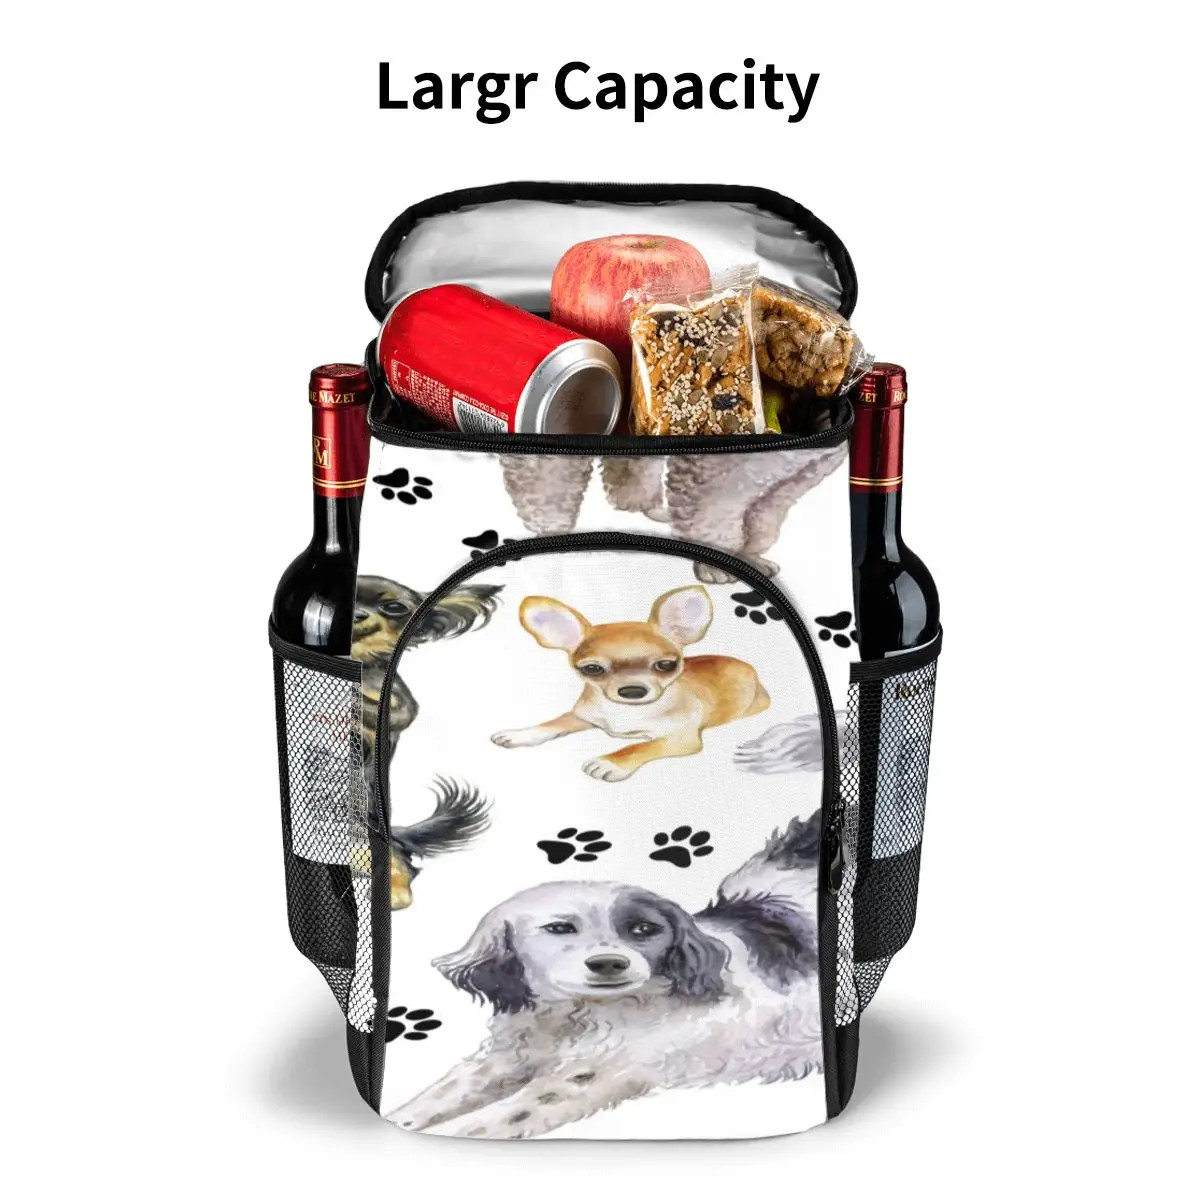 protable insulated thermal cooler waterproof lunch bag thoroughbred dogs footprints picnic camping backpack double shoulder bag free global shipping